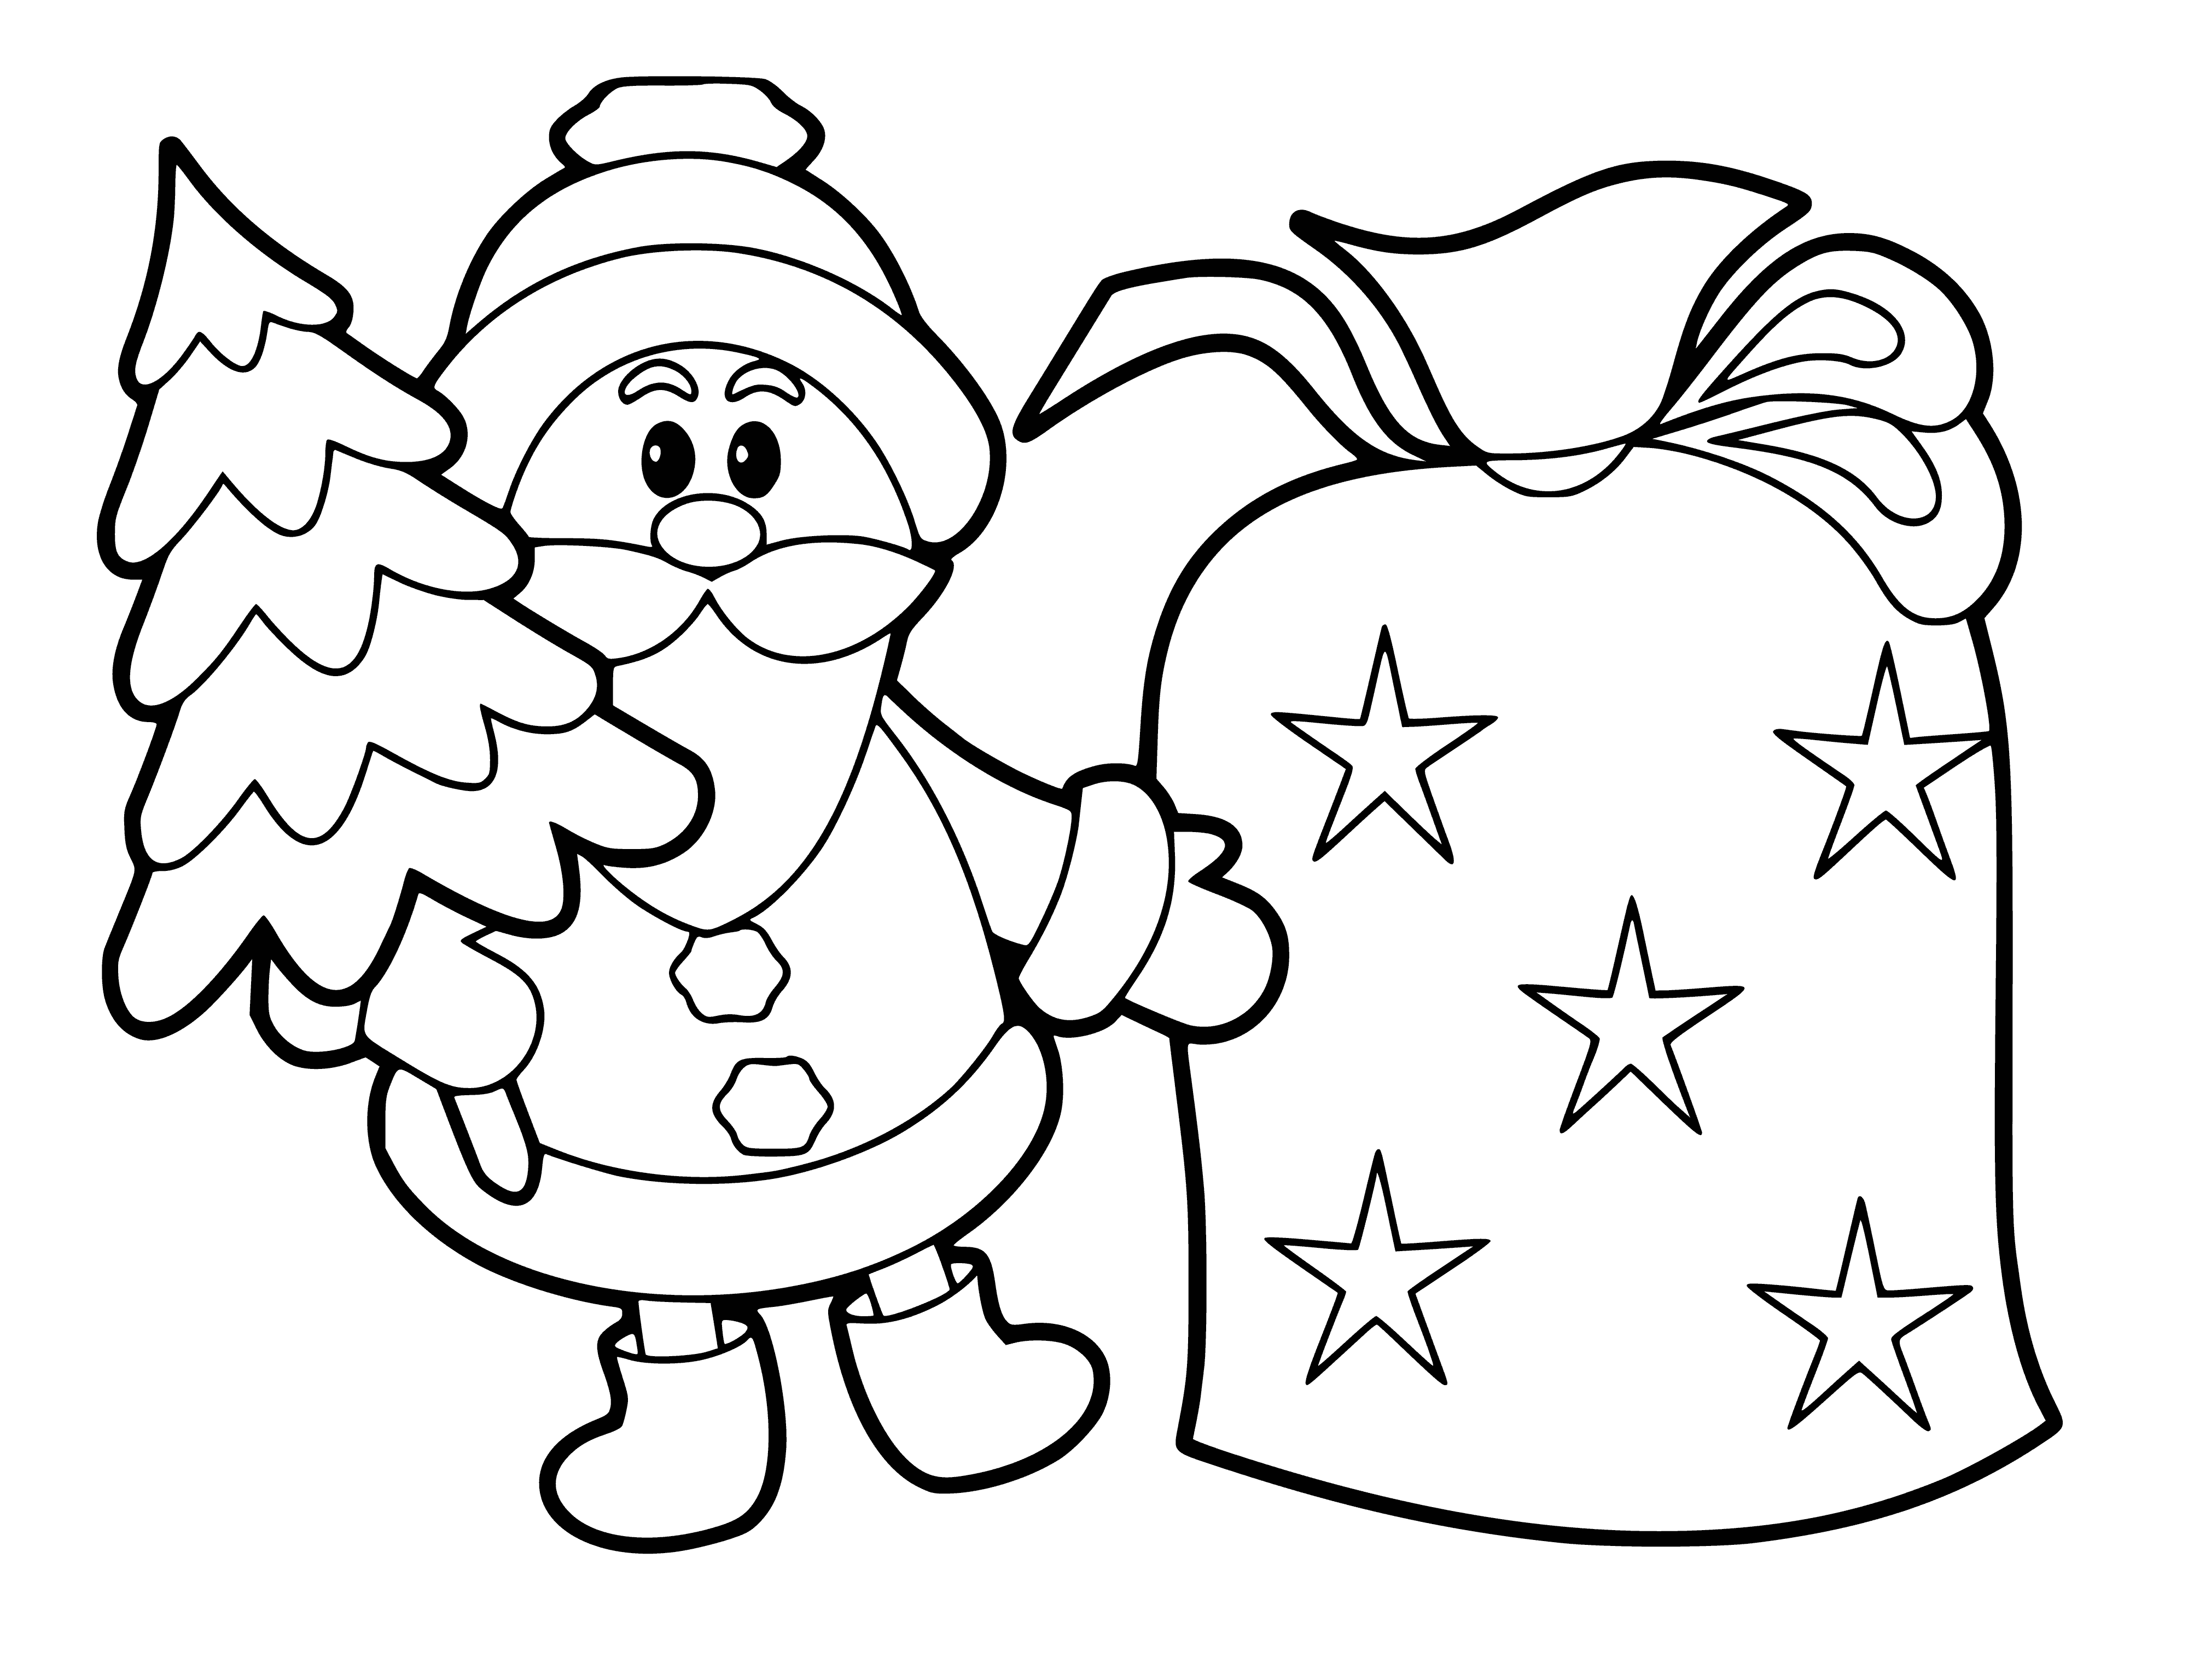 coloring page: Santa Claus stands happily in his sleigh with a big belly, white beard & red suit, ready to deliver toys via 8 reindeer around the world.